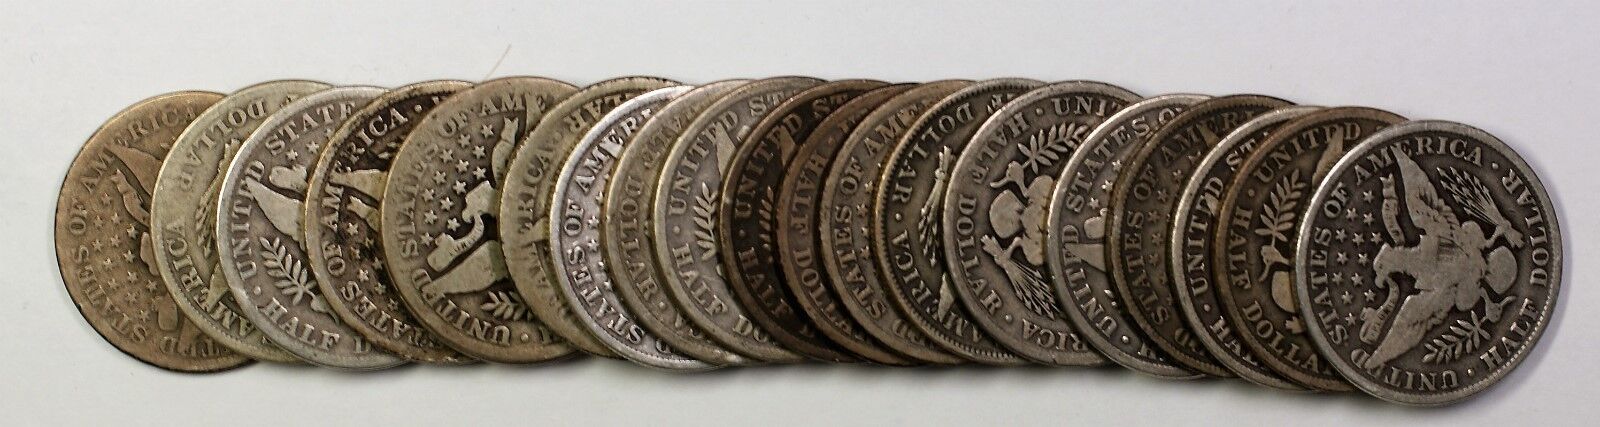 1900 Barber Half Dollar 50c Roll 20 Circulated 90% Old Silver Coins Lot